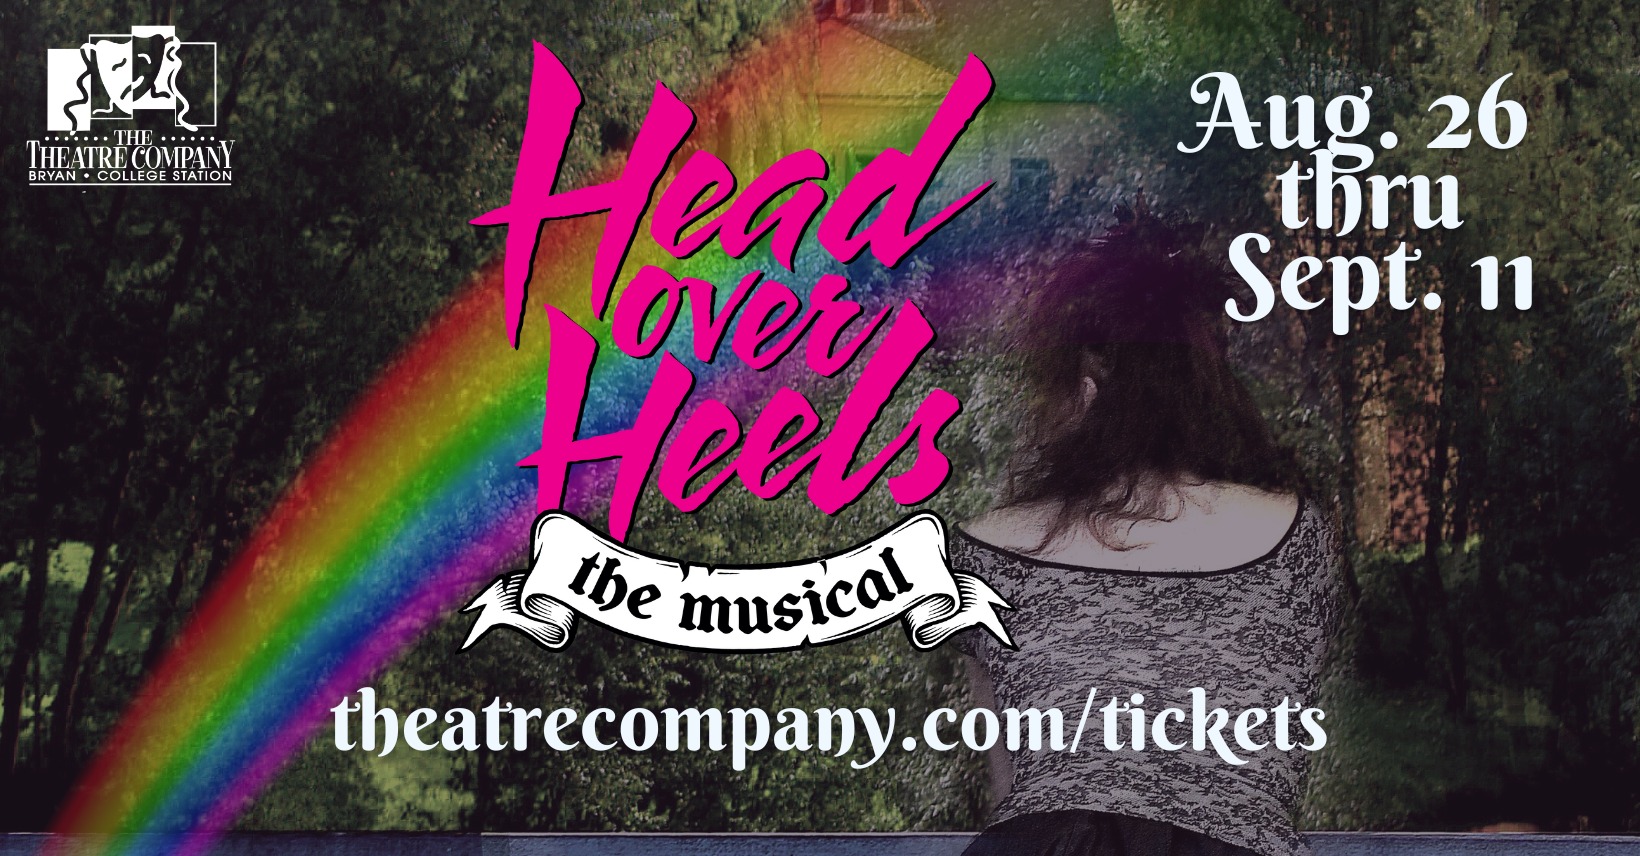 Head Over Heels by The Theatre Company